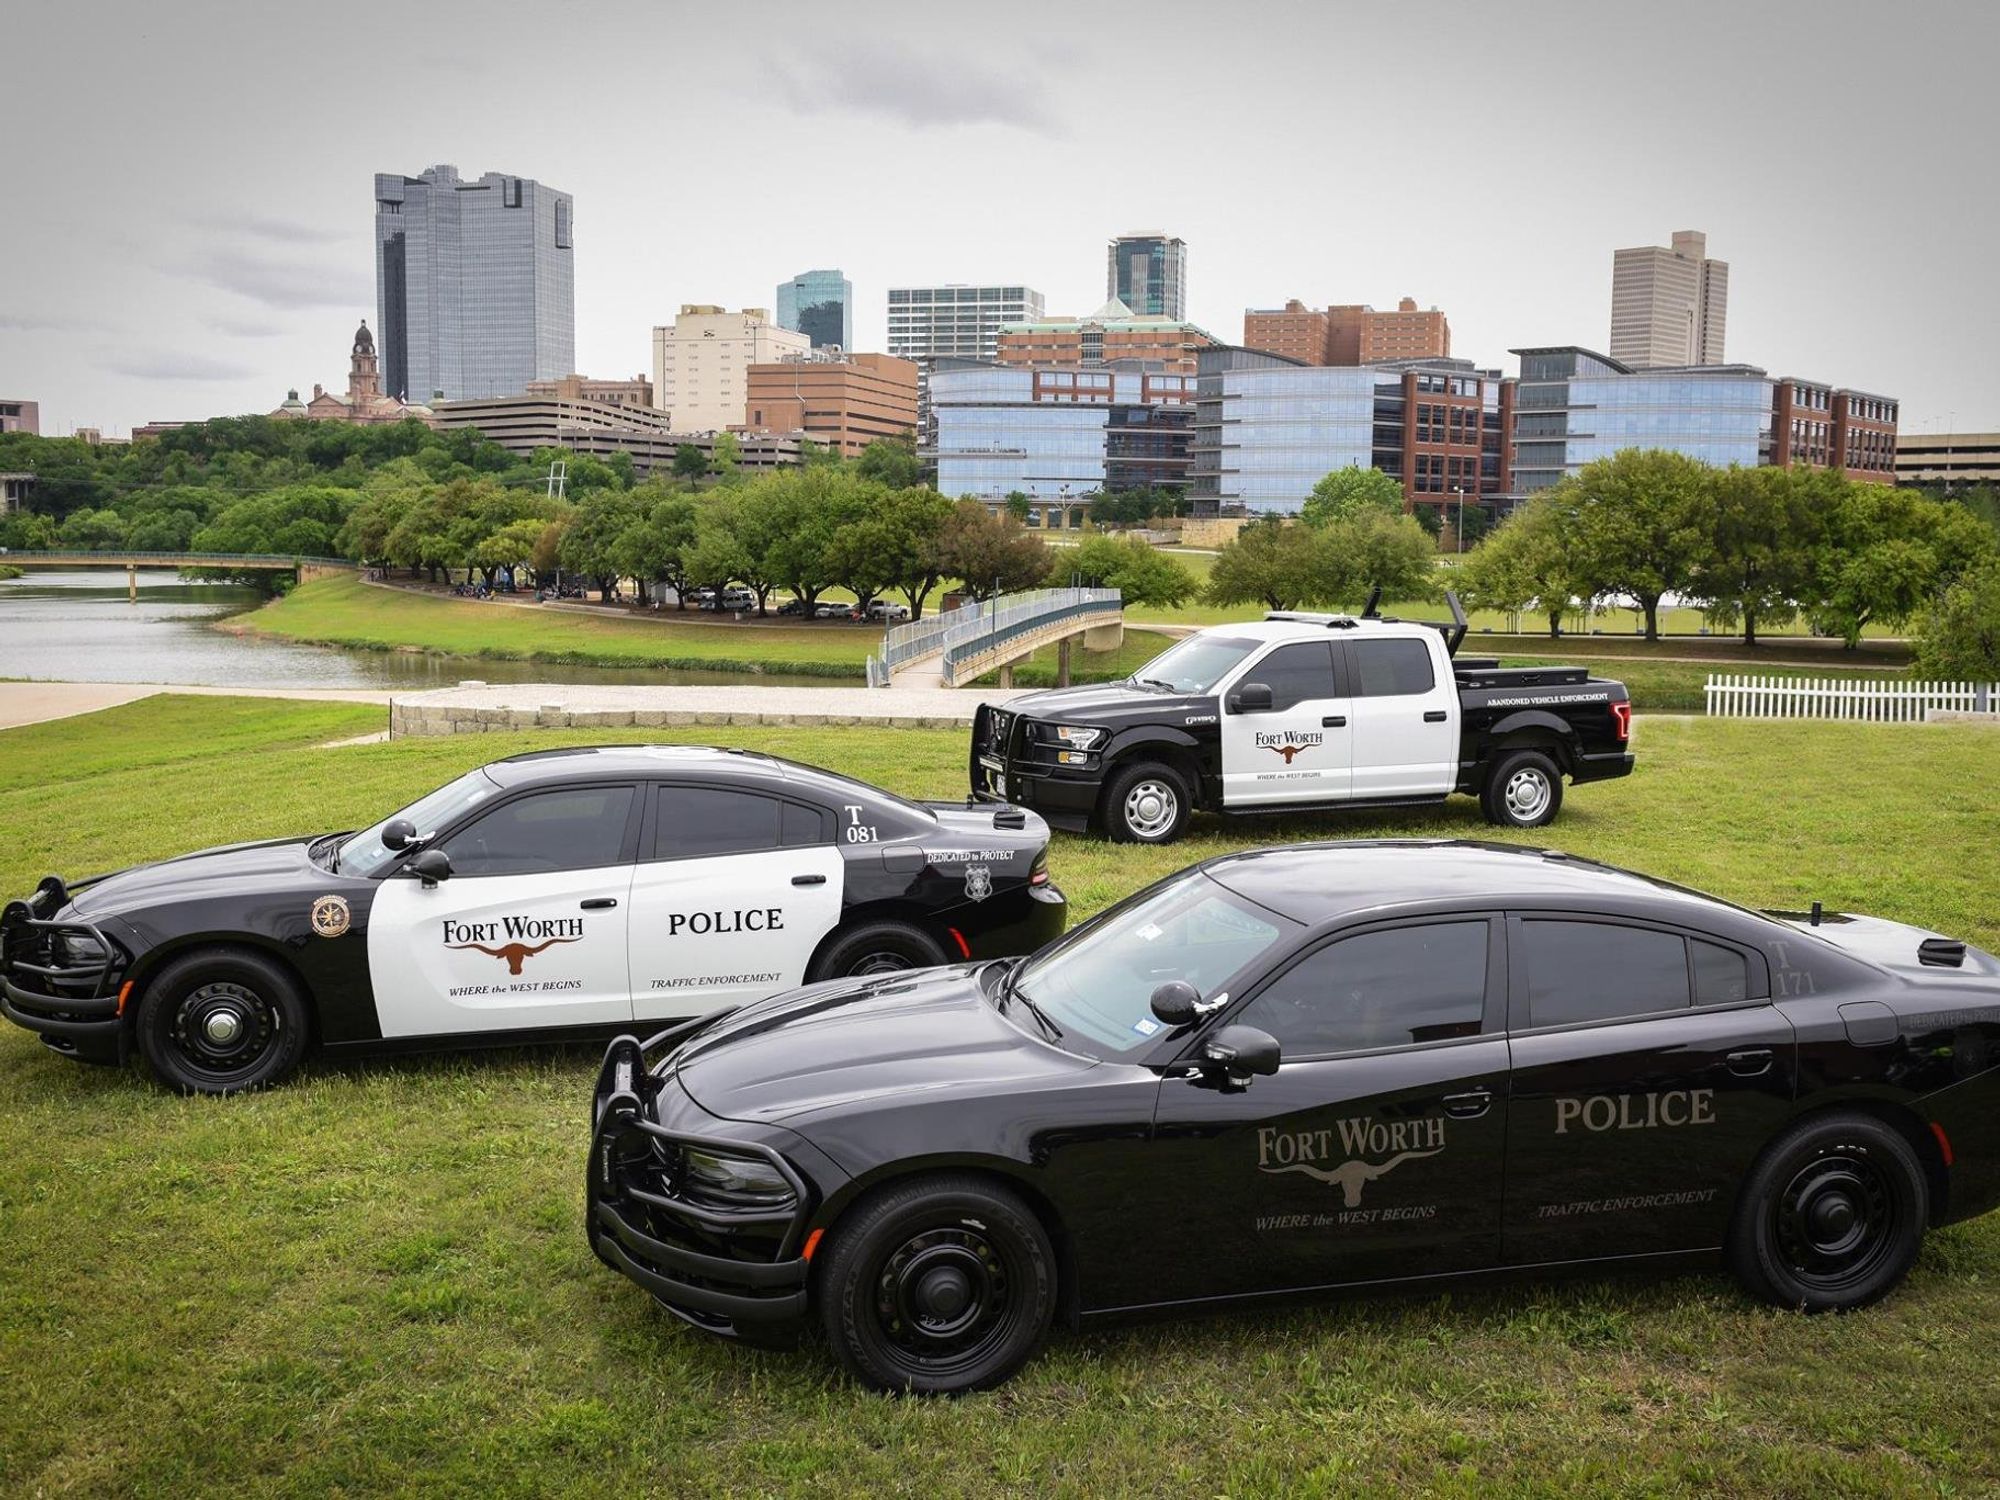 Fort Worth police department car